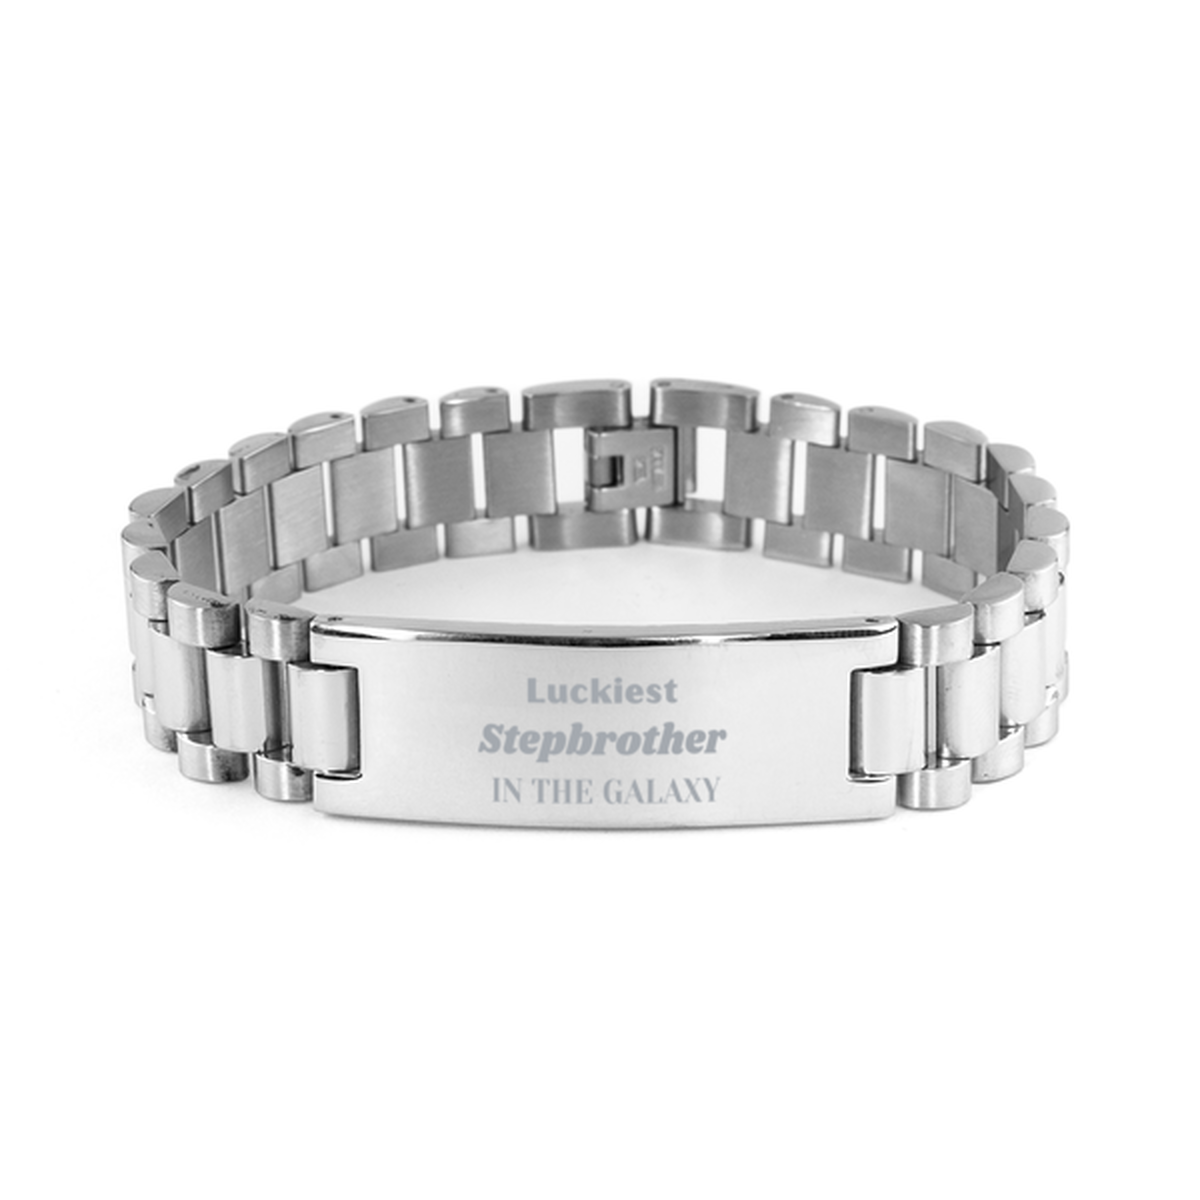 Luckiest Stepbrother in the Galaxy, To My Stepbrother Engraved Gifts, Christmas Stepbrother Ladder Stainless Steel Bracelet Gifts, X-mas Birthday Unique Gifts For Stepbrother Men Women